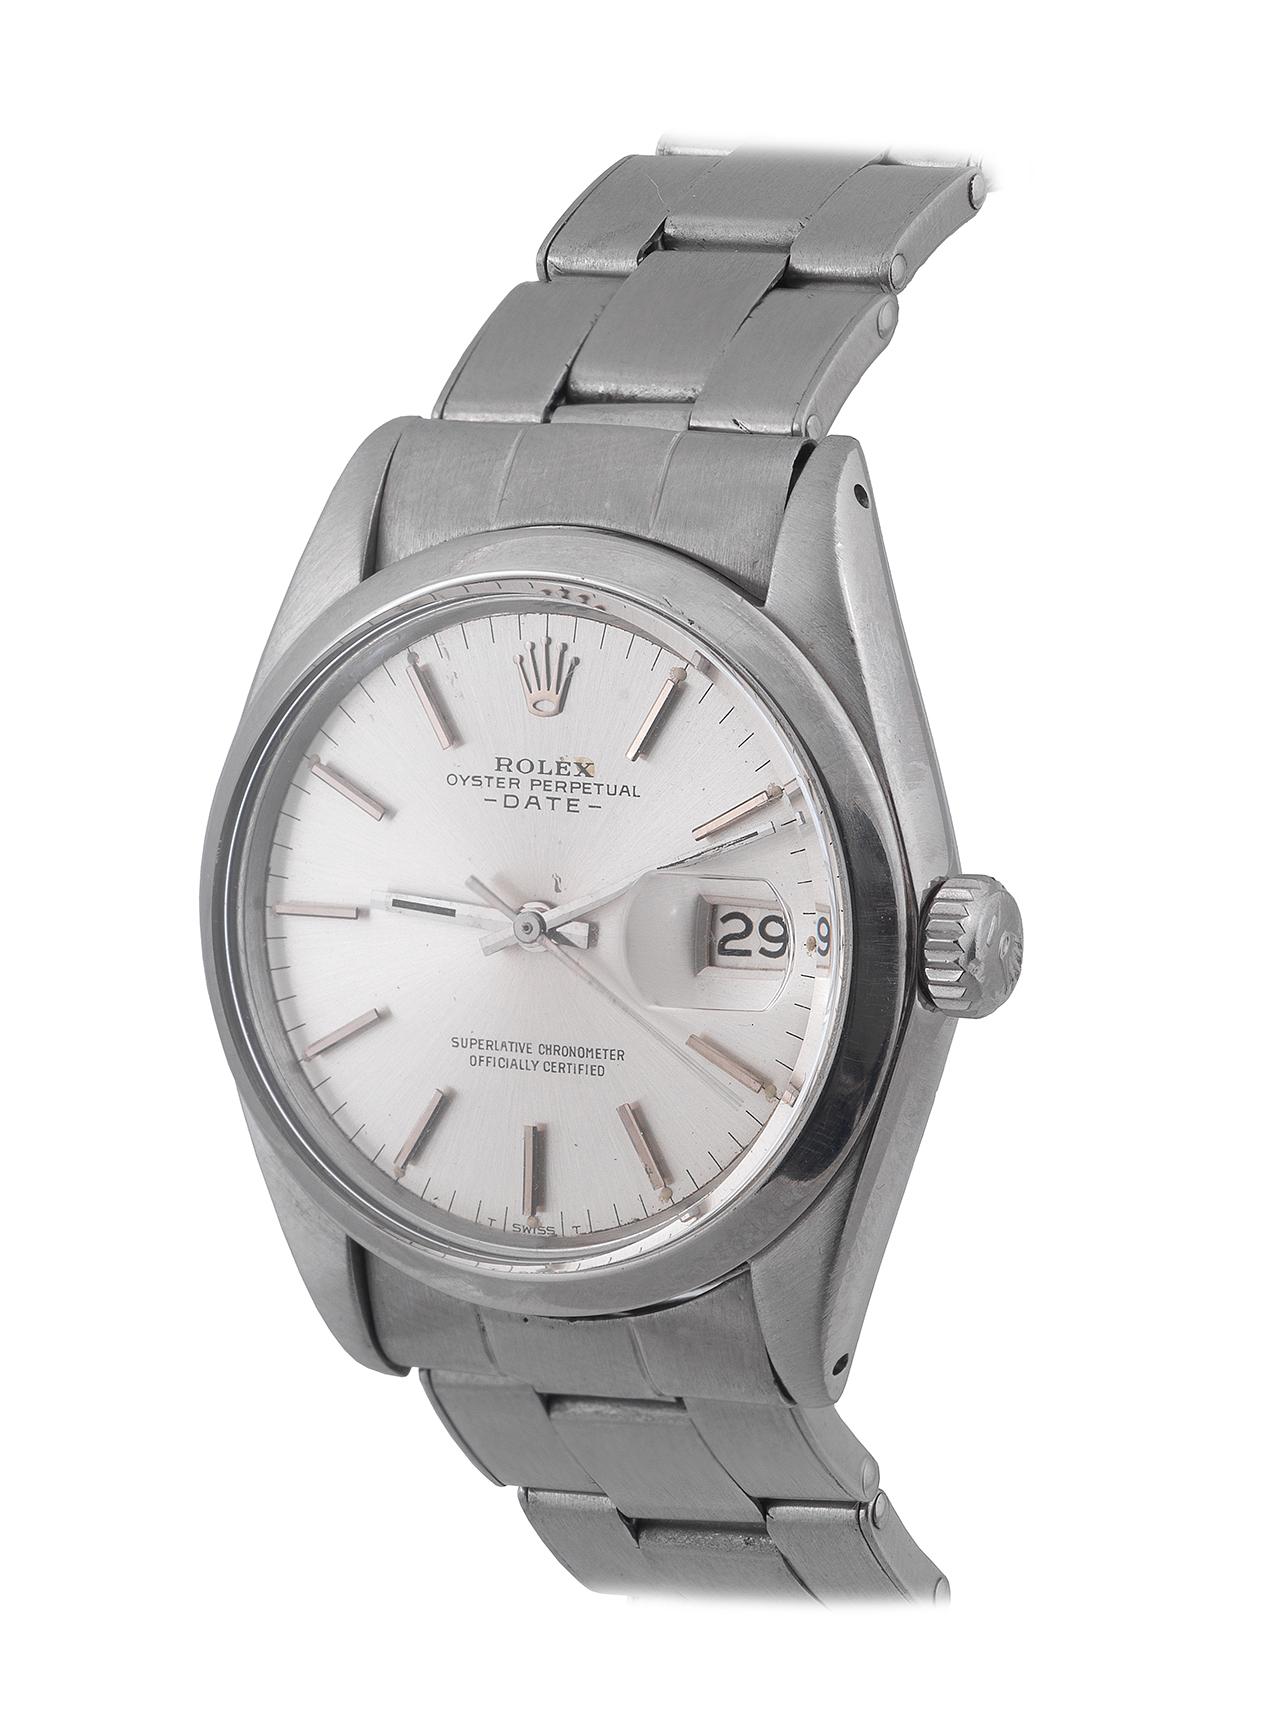 BERNARDO ANTICHITÀ PONTE VECCHIO FLORENCE

Signed ROLEX, OYSTER PERPETUAL, DATE, REF. 1500, Case  NO. 2.5XX.XXX, CIRCA 1971
Cal. 1570 nickel-finished lever movement, 26 jewels, silvered sunburst dial, applied baton numerals and luminous accents,